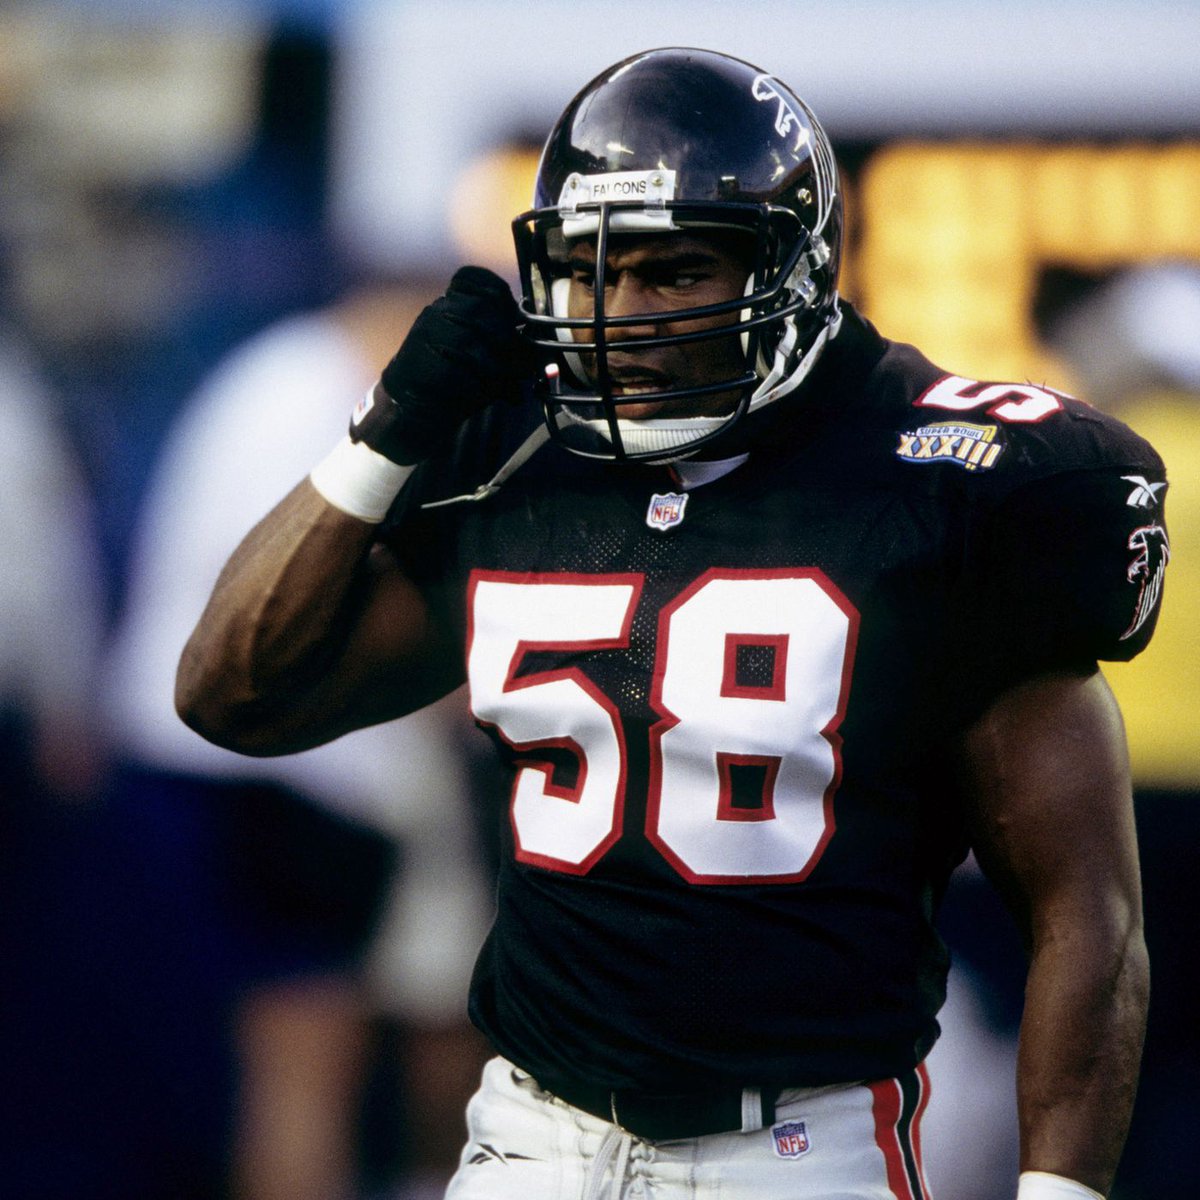 Yet Jessie Tuggle is NOT in the Hall of Fame? Make it make sense, somebody!

#DirtyBirds